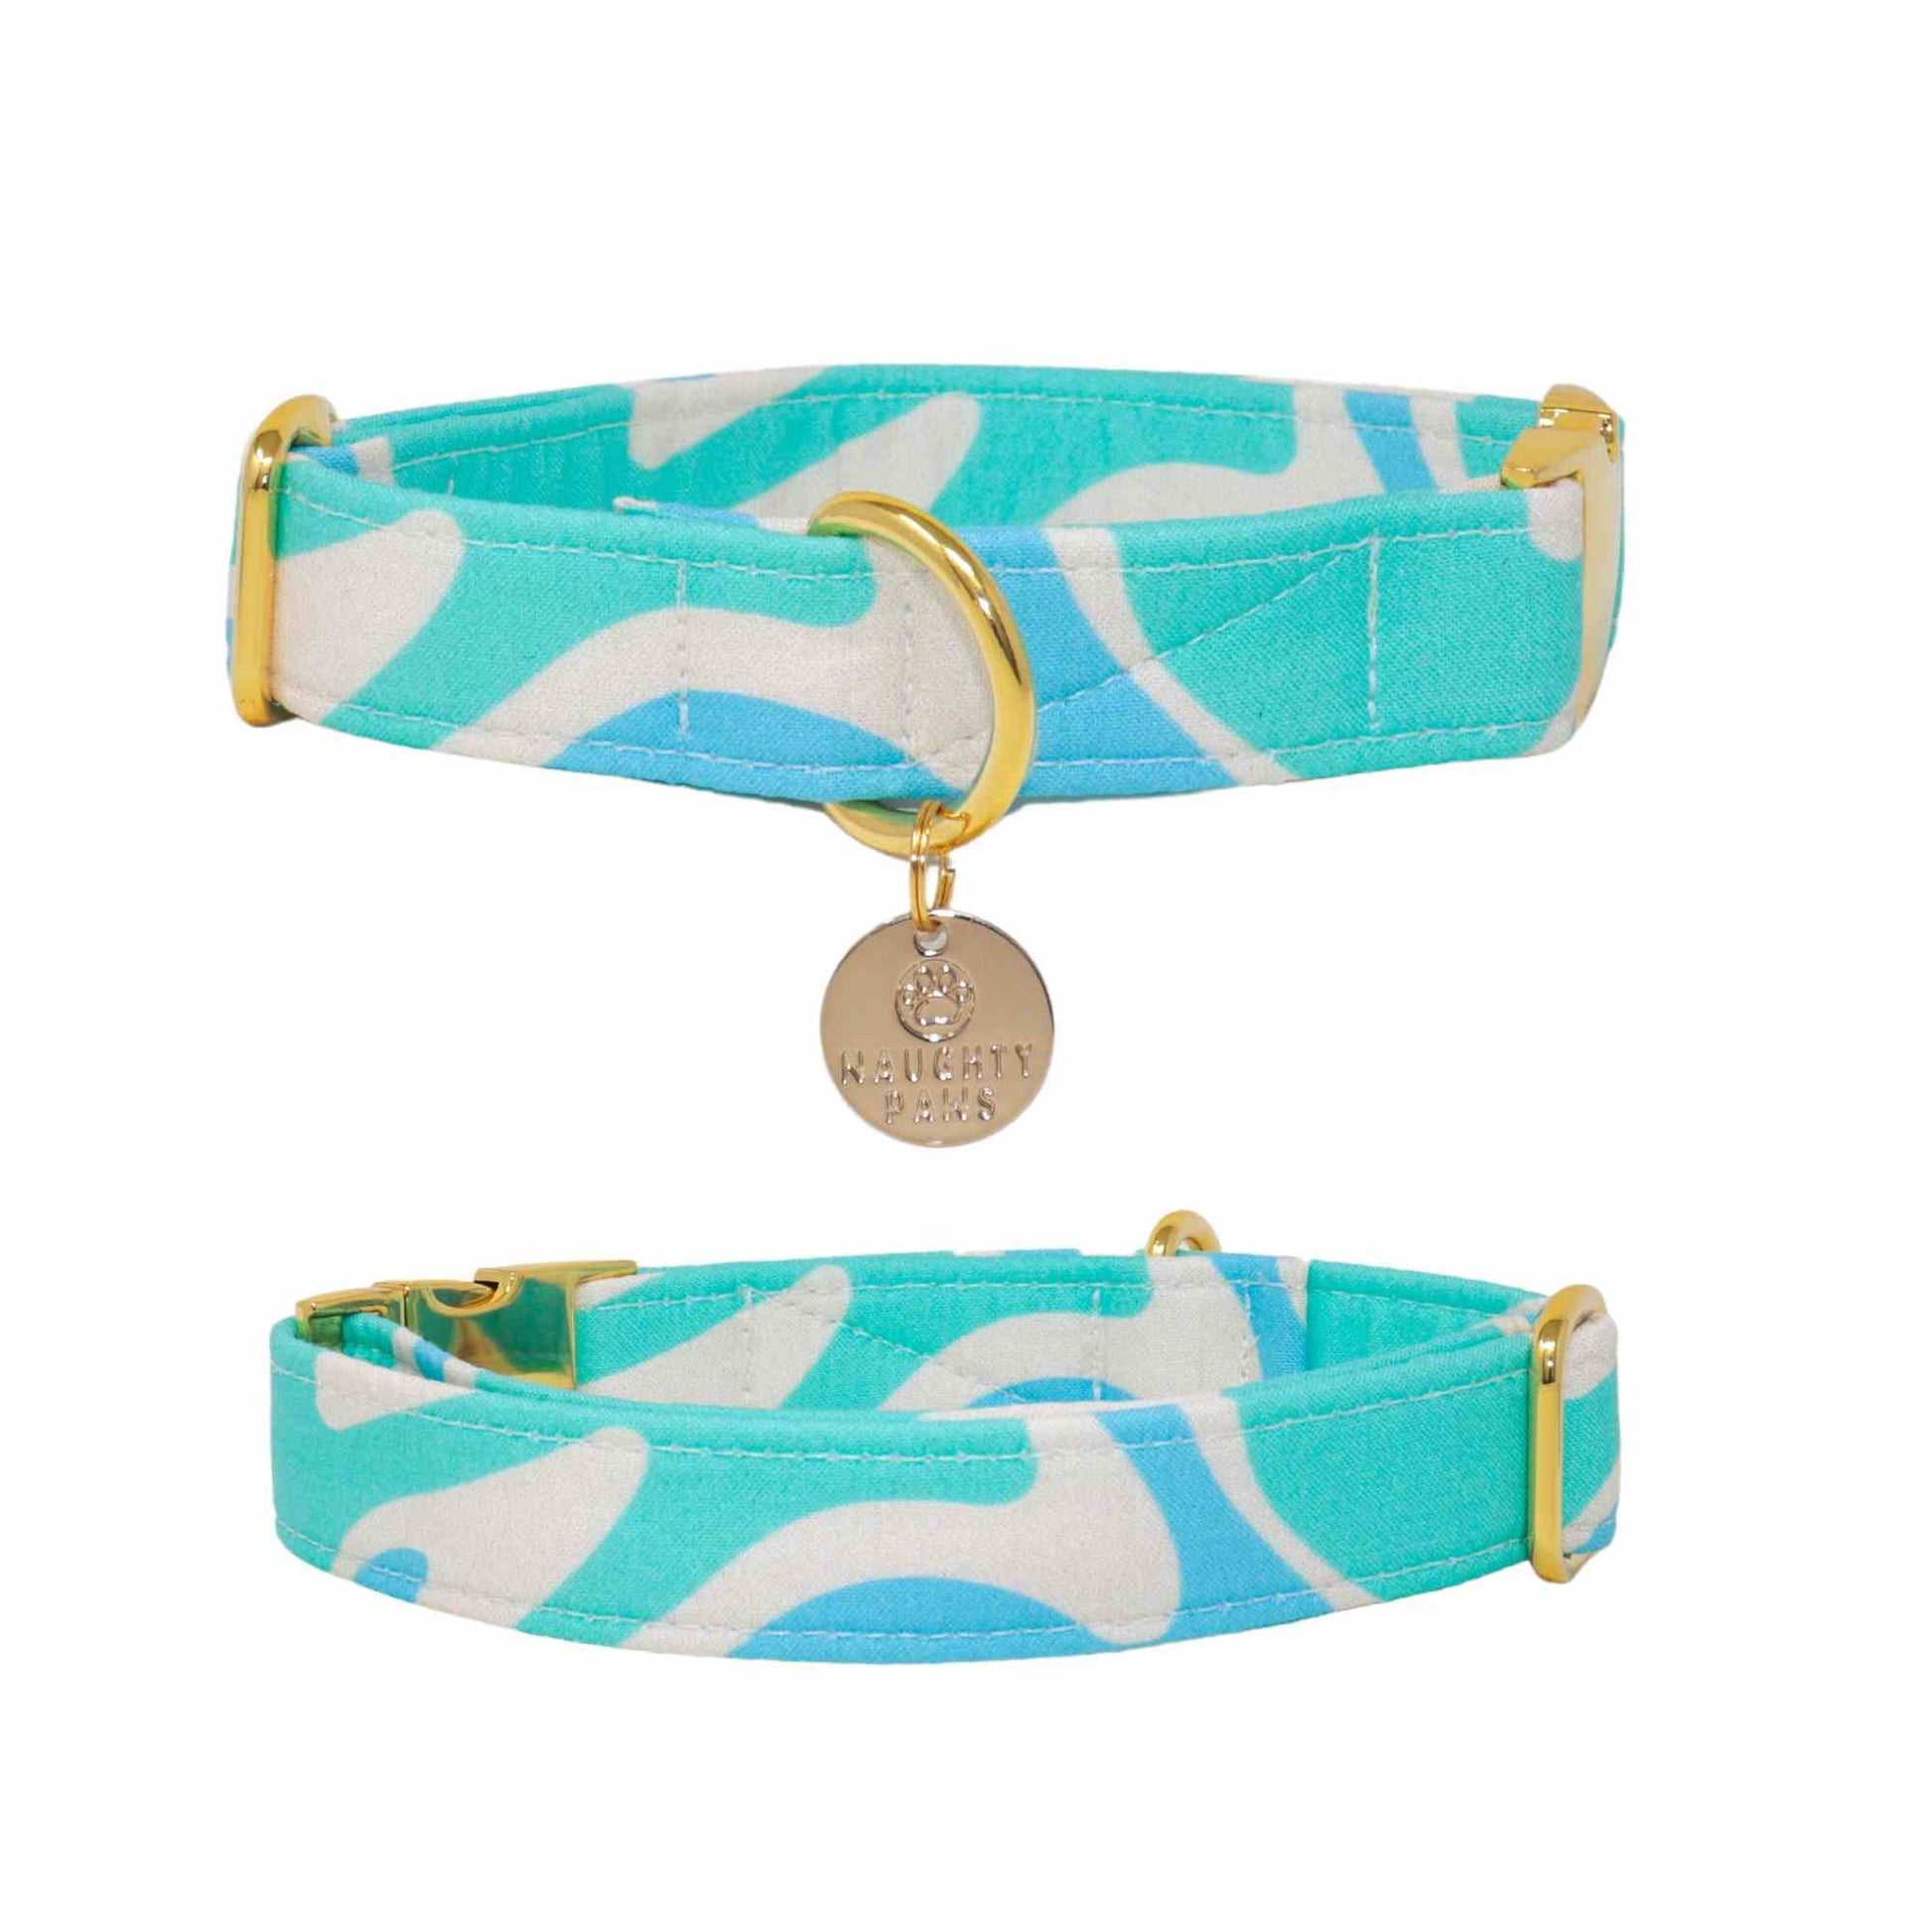 Green and Turquoise Groovy Wave Design with Metal Hardware - Perfect for Summer - Available in Sizes XXS to XL - Ideal for Male Dogs